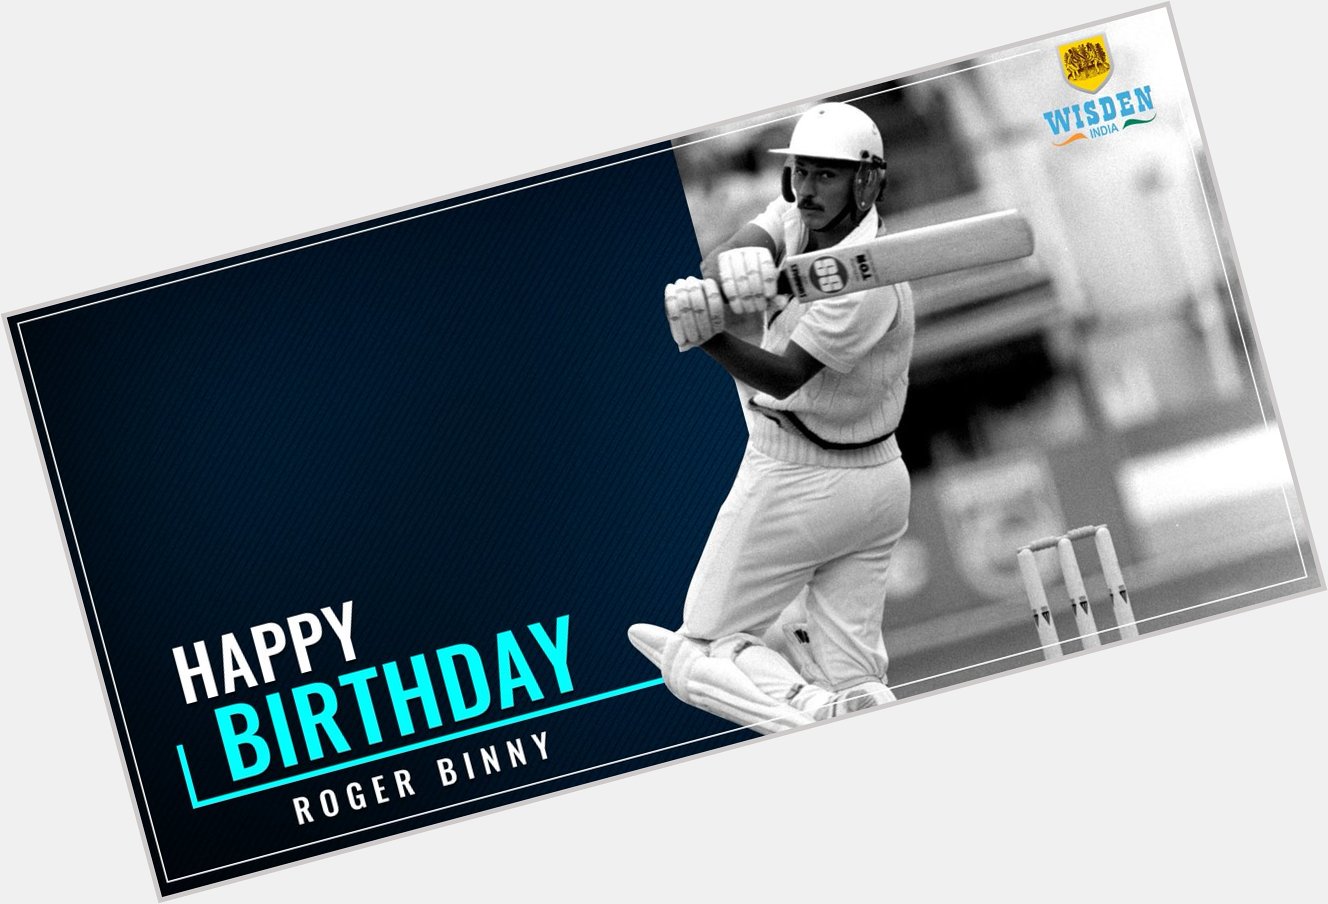 He was the leading wicket taker & a crucial part in India\s 1983 win. Happy Birthday Roger Binny! 